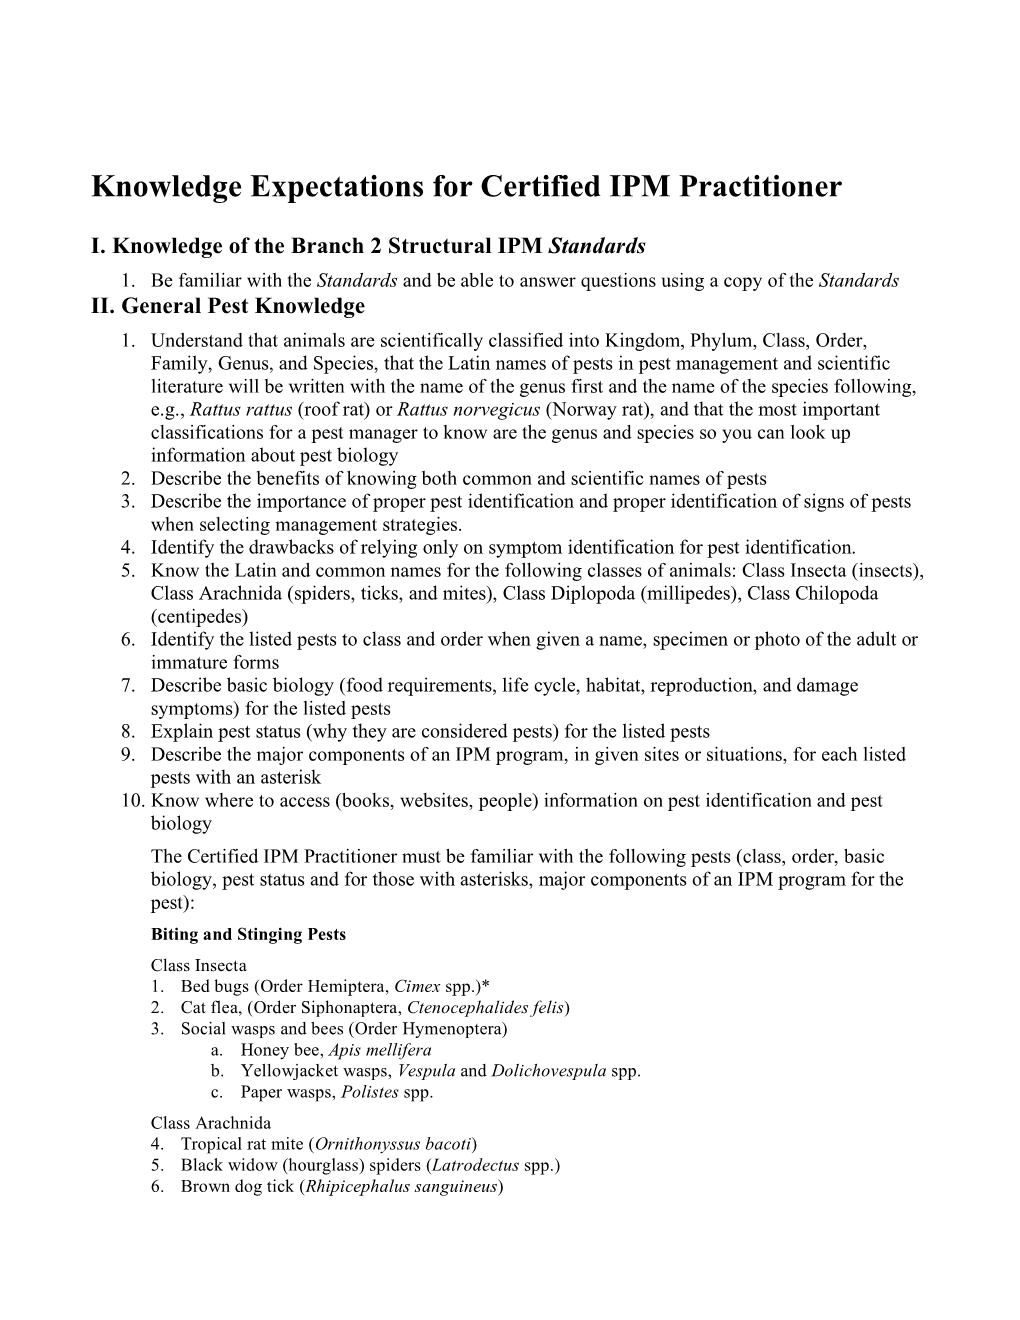 Knowledge Expectations for Certified IPM Practitioner